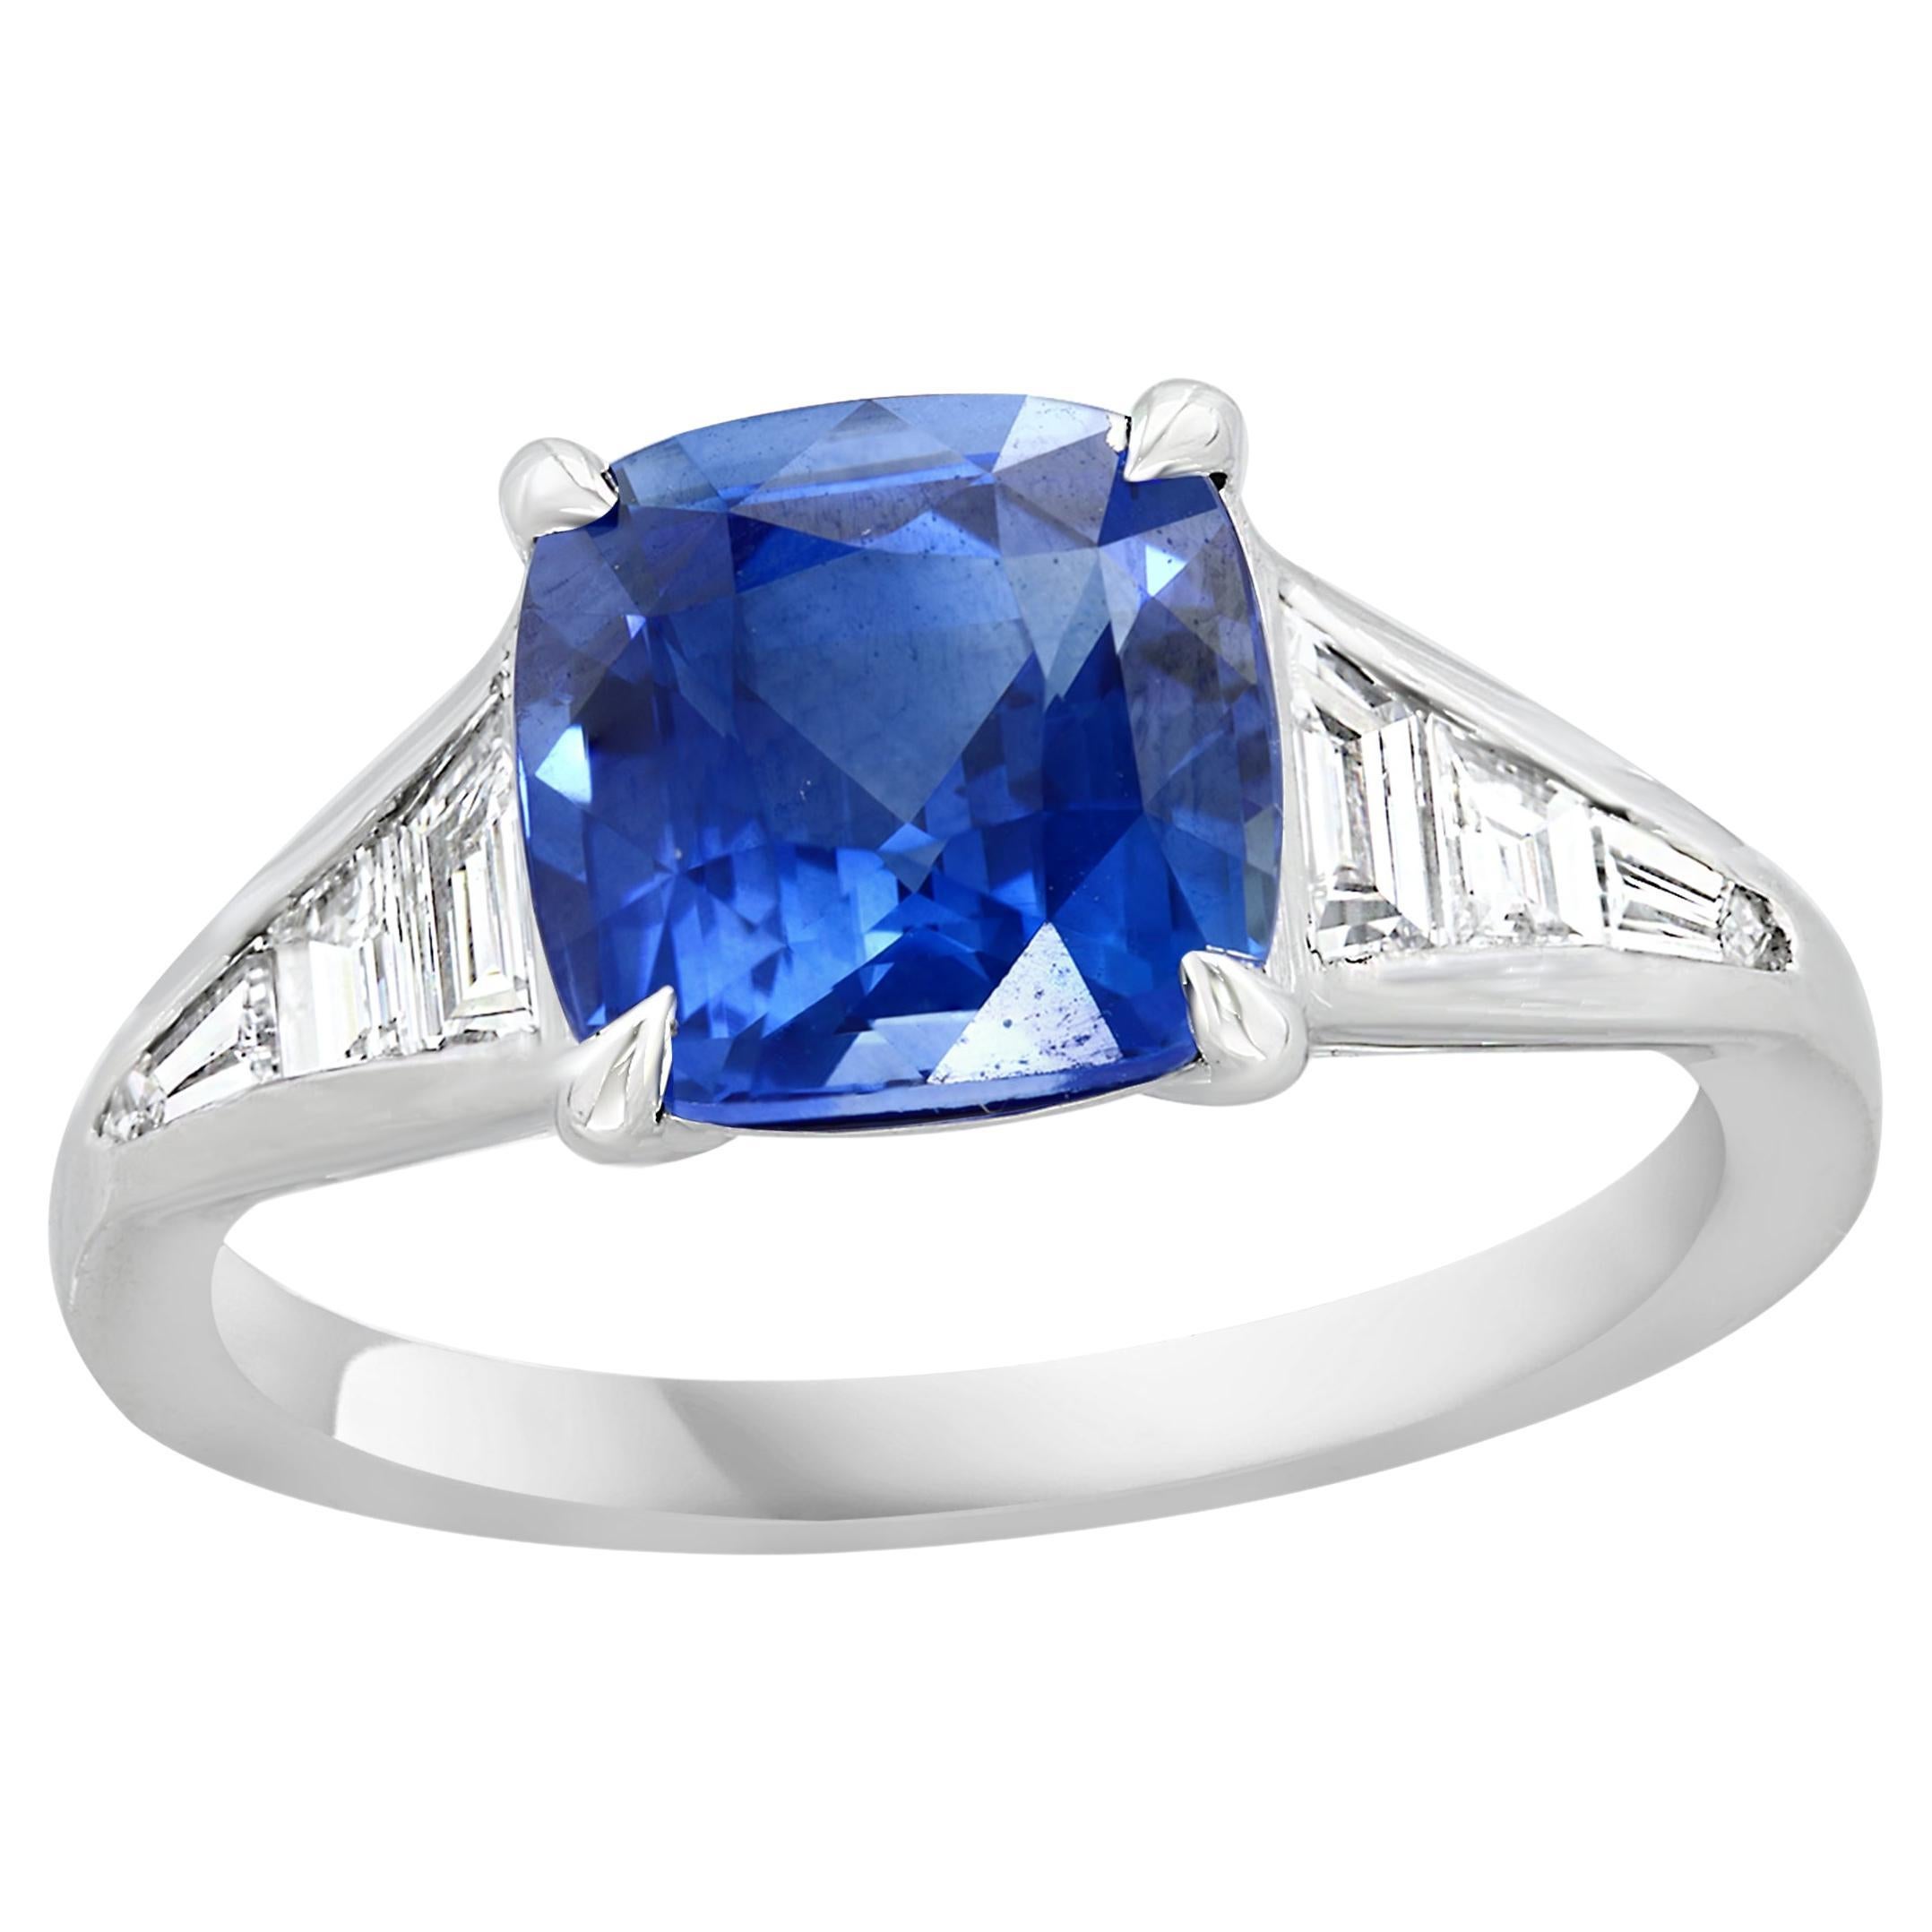 3.39 Carat Cushion Cut Blue Sapphire and Diamond Engagement Ring in Platinum For Sale